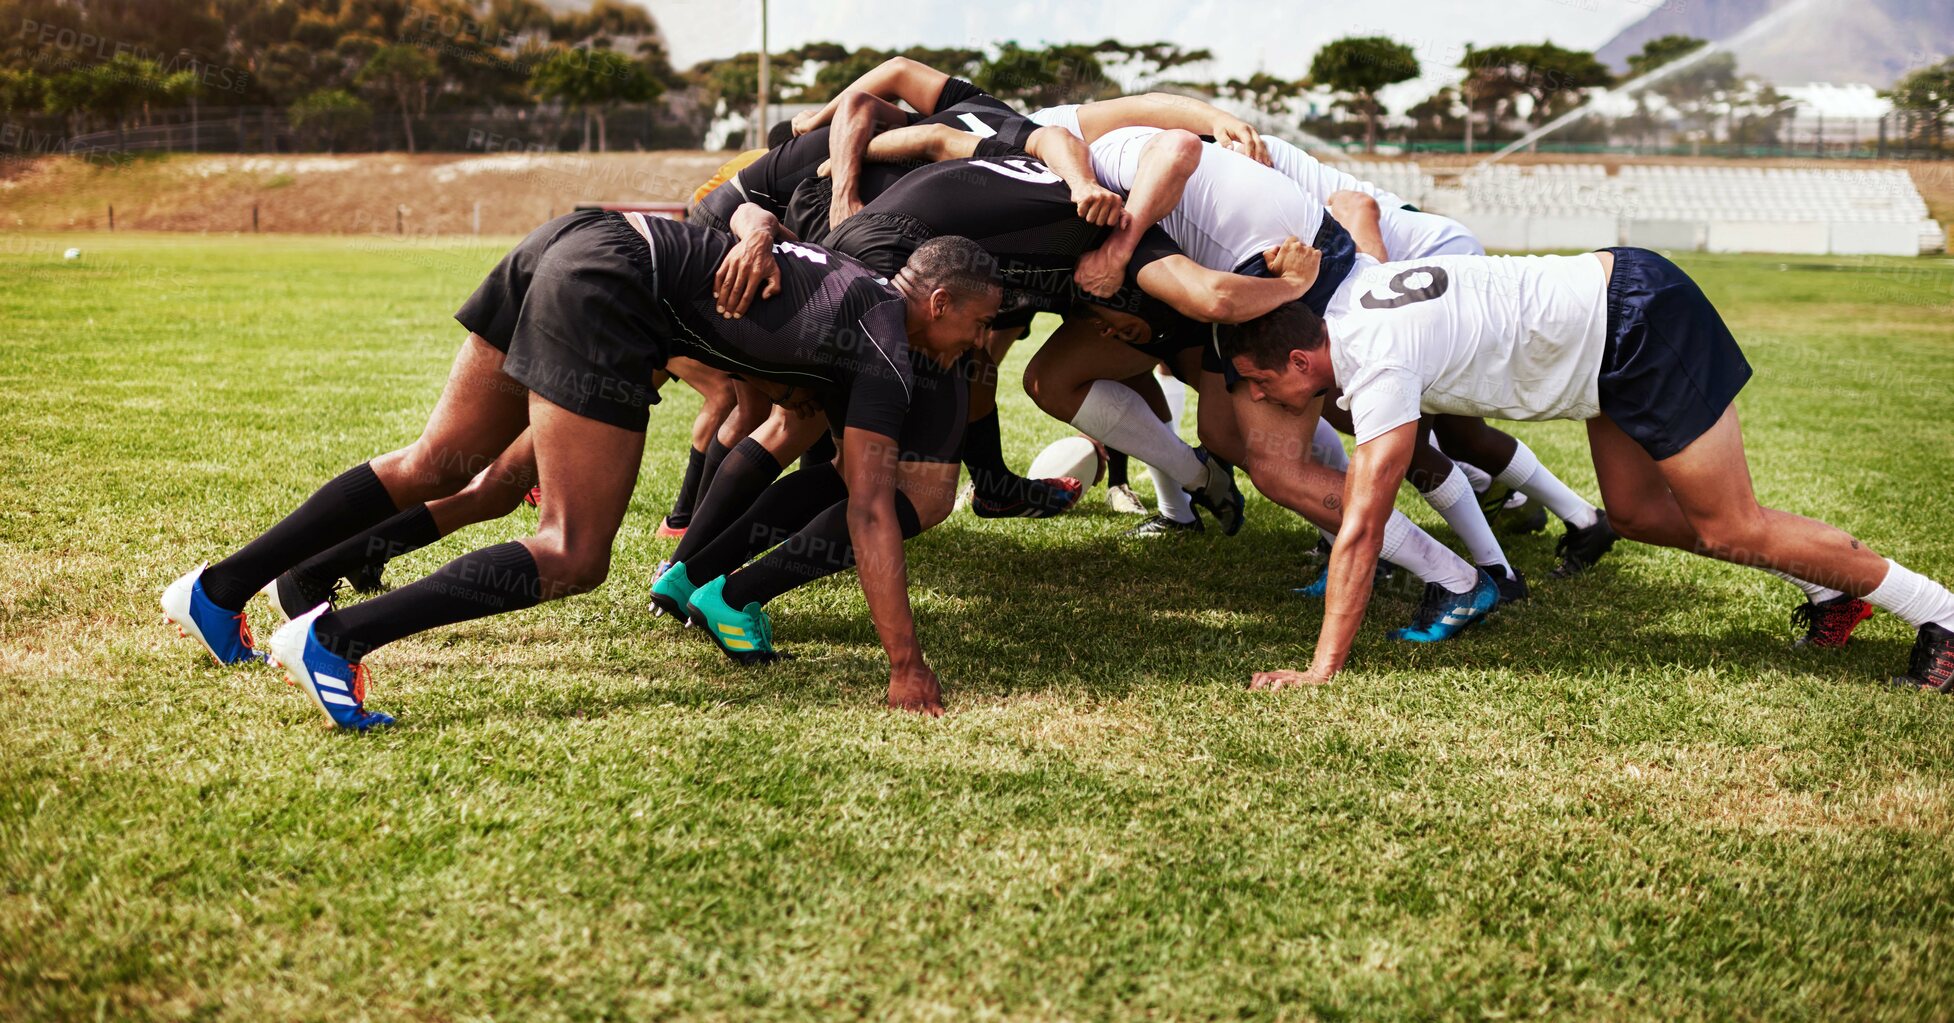 Buy stock photo Shot of a group of young rugby players in a scrum on the field